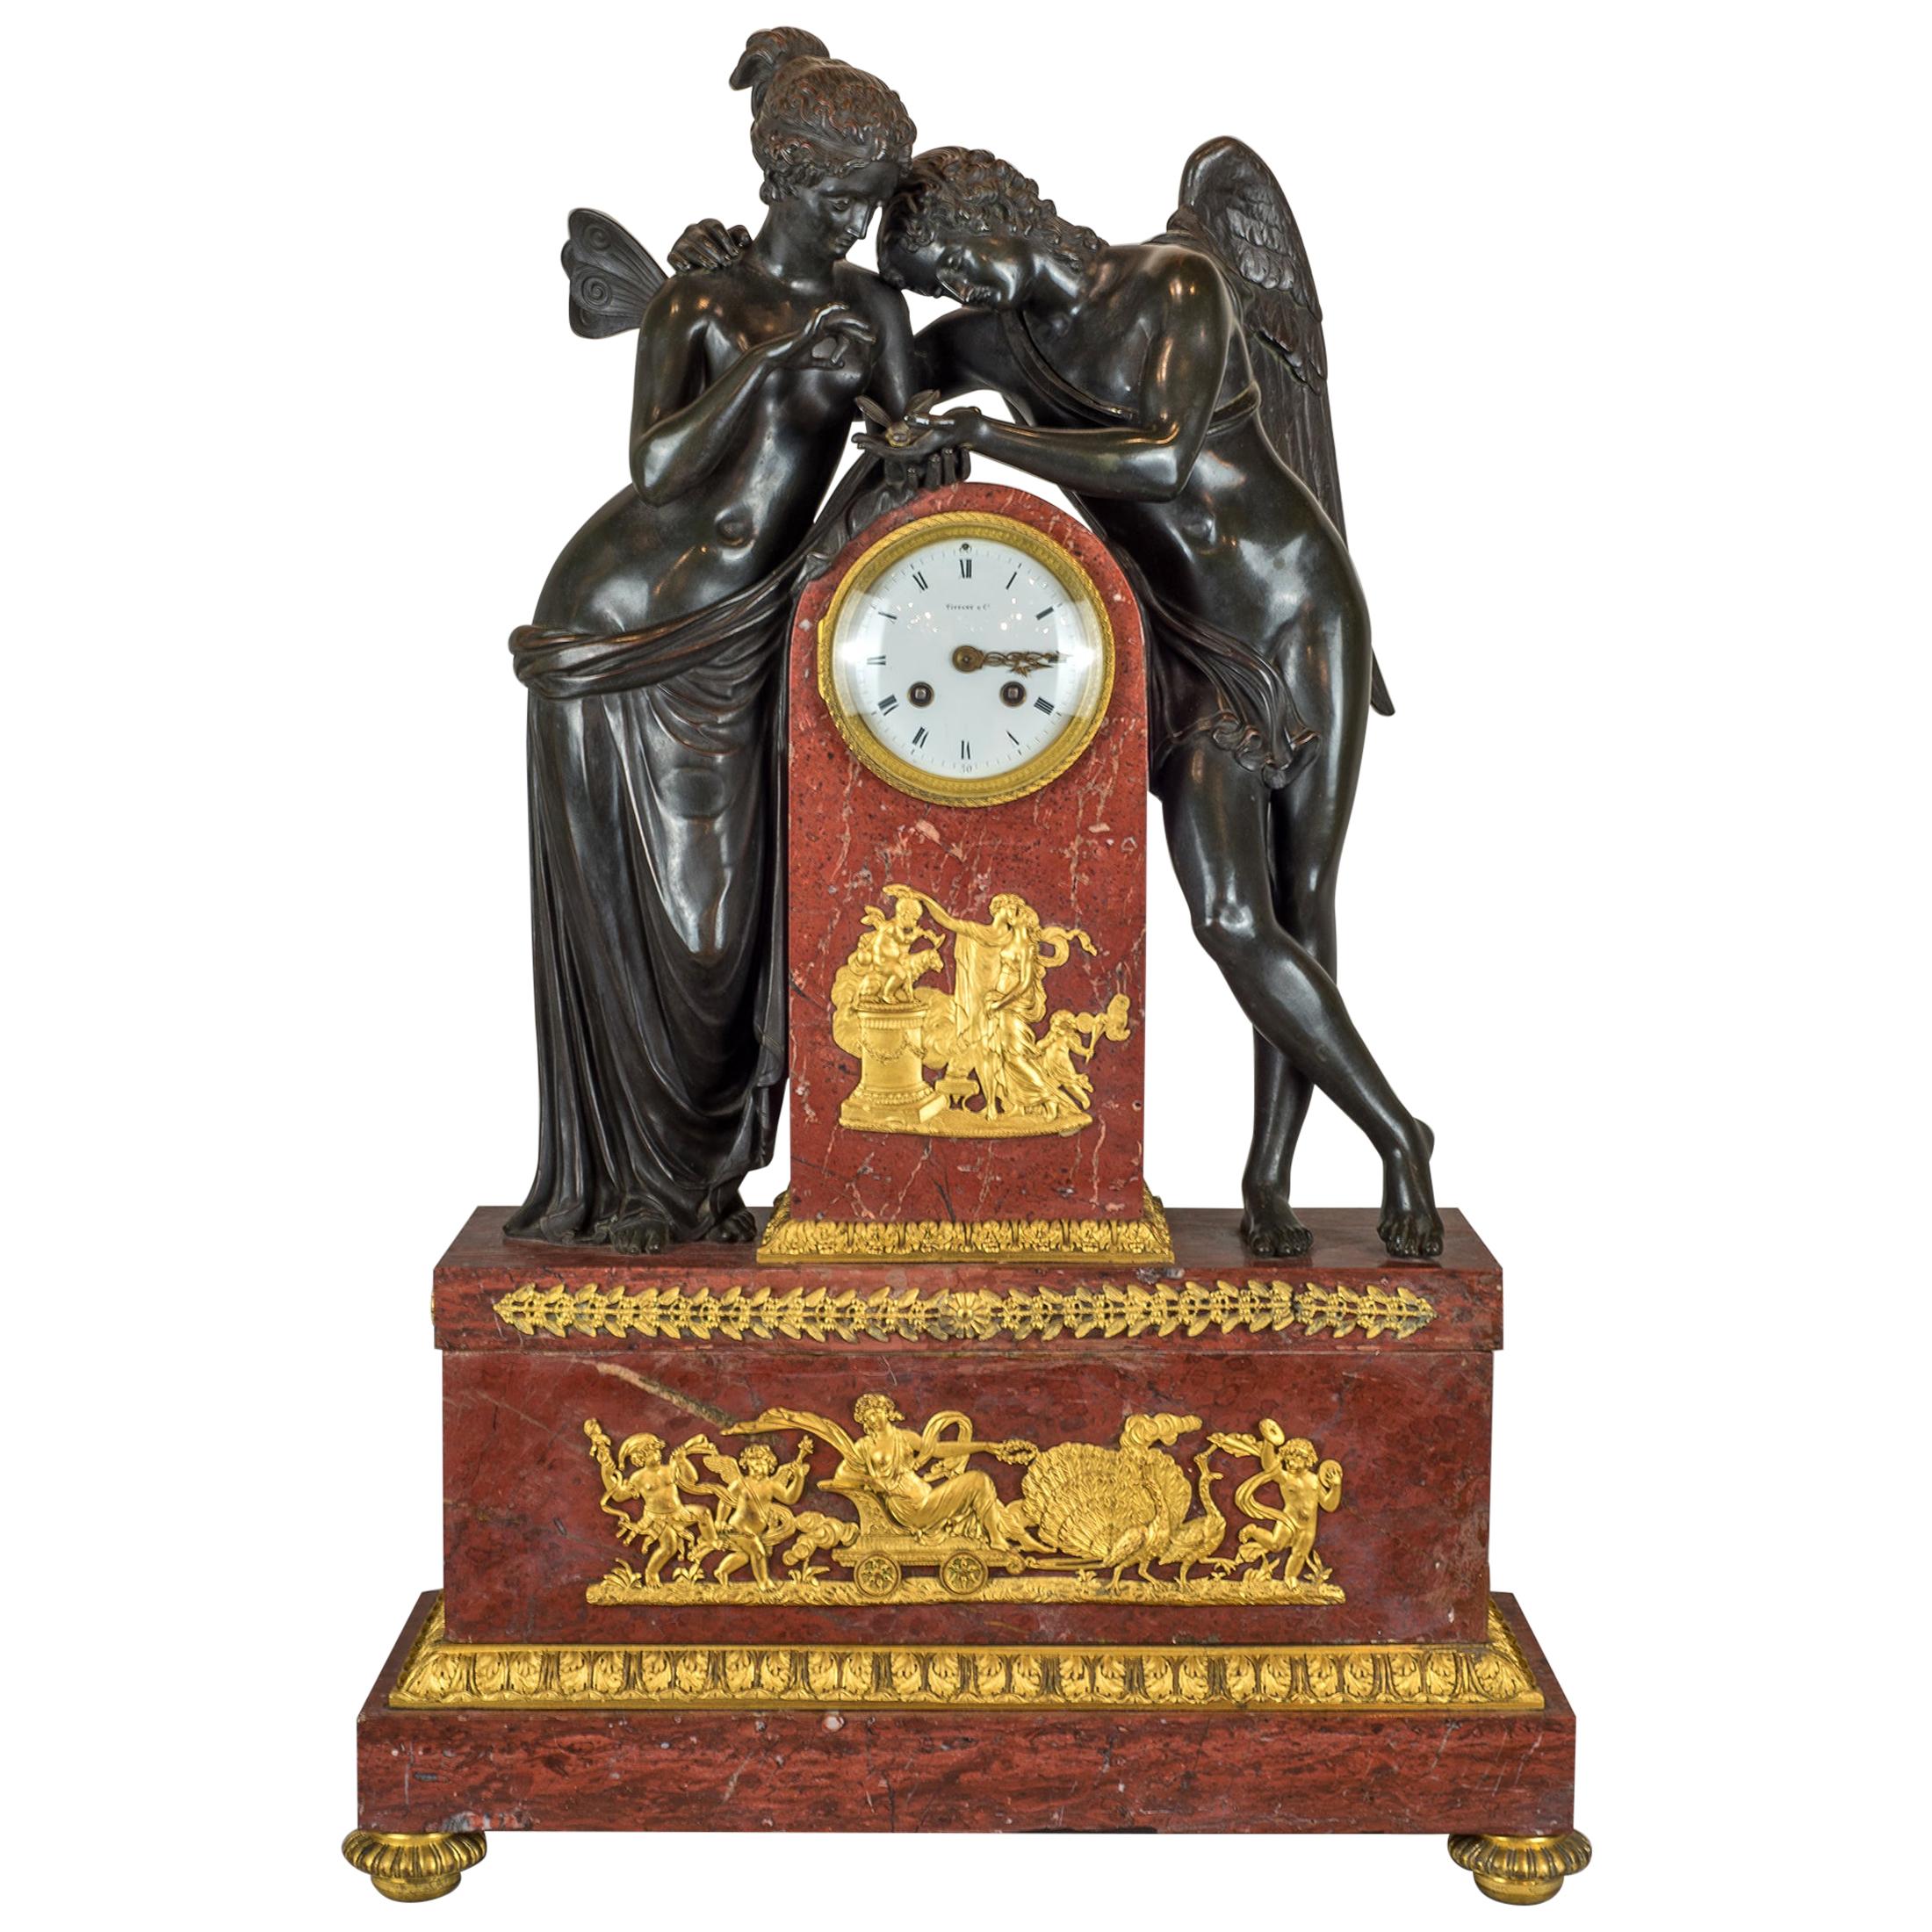 Exquisite Figural Mantel Clock Retailed by Tiffany & Co. Signed Thomire